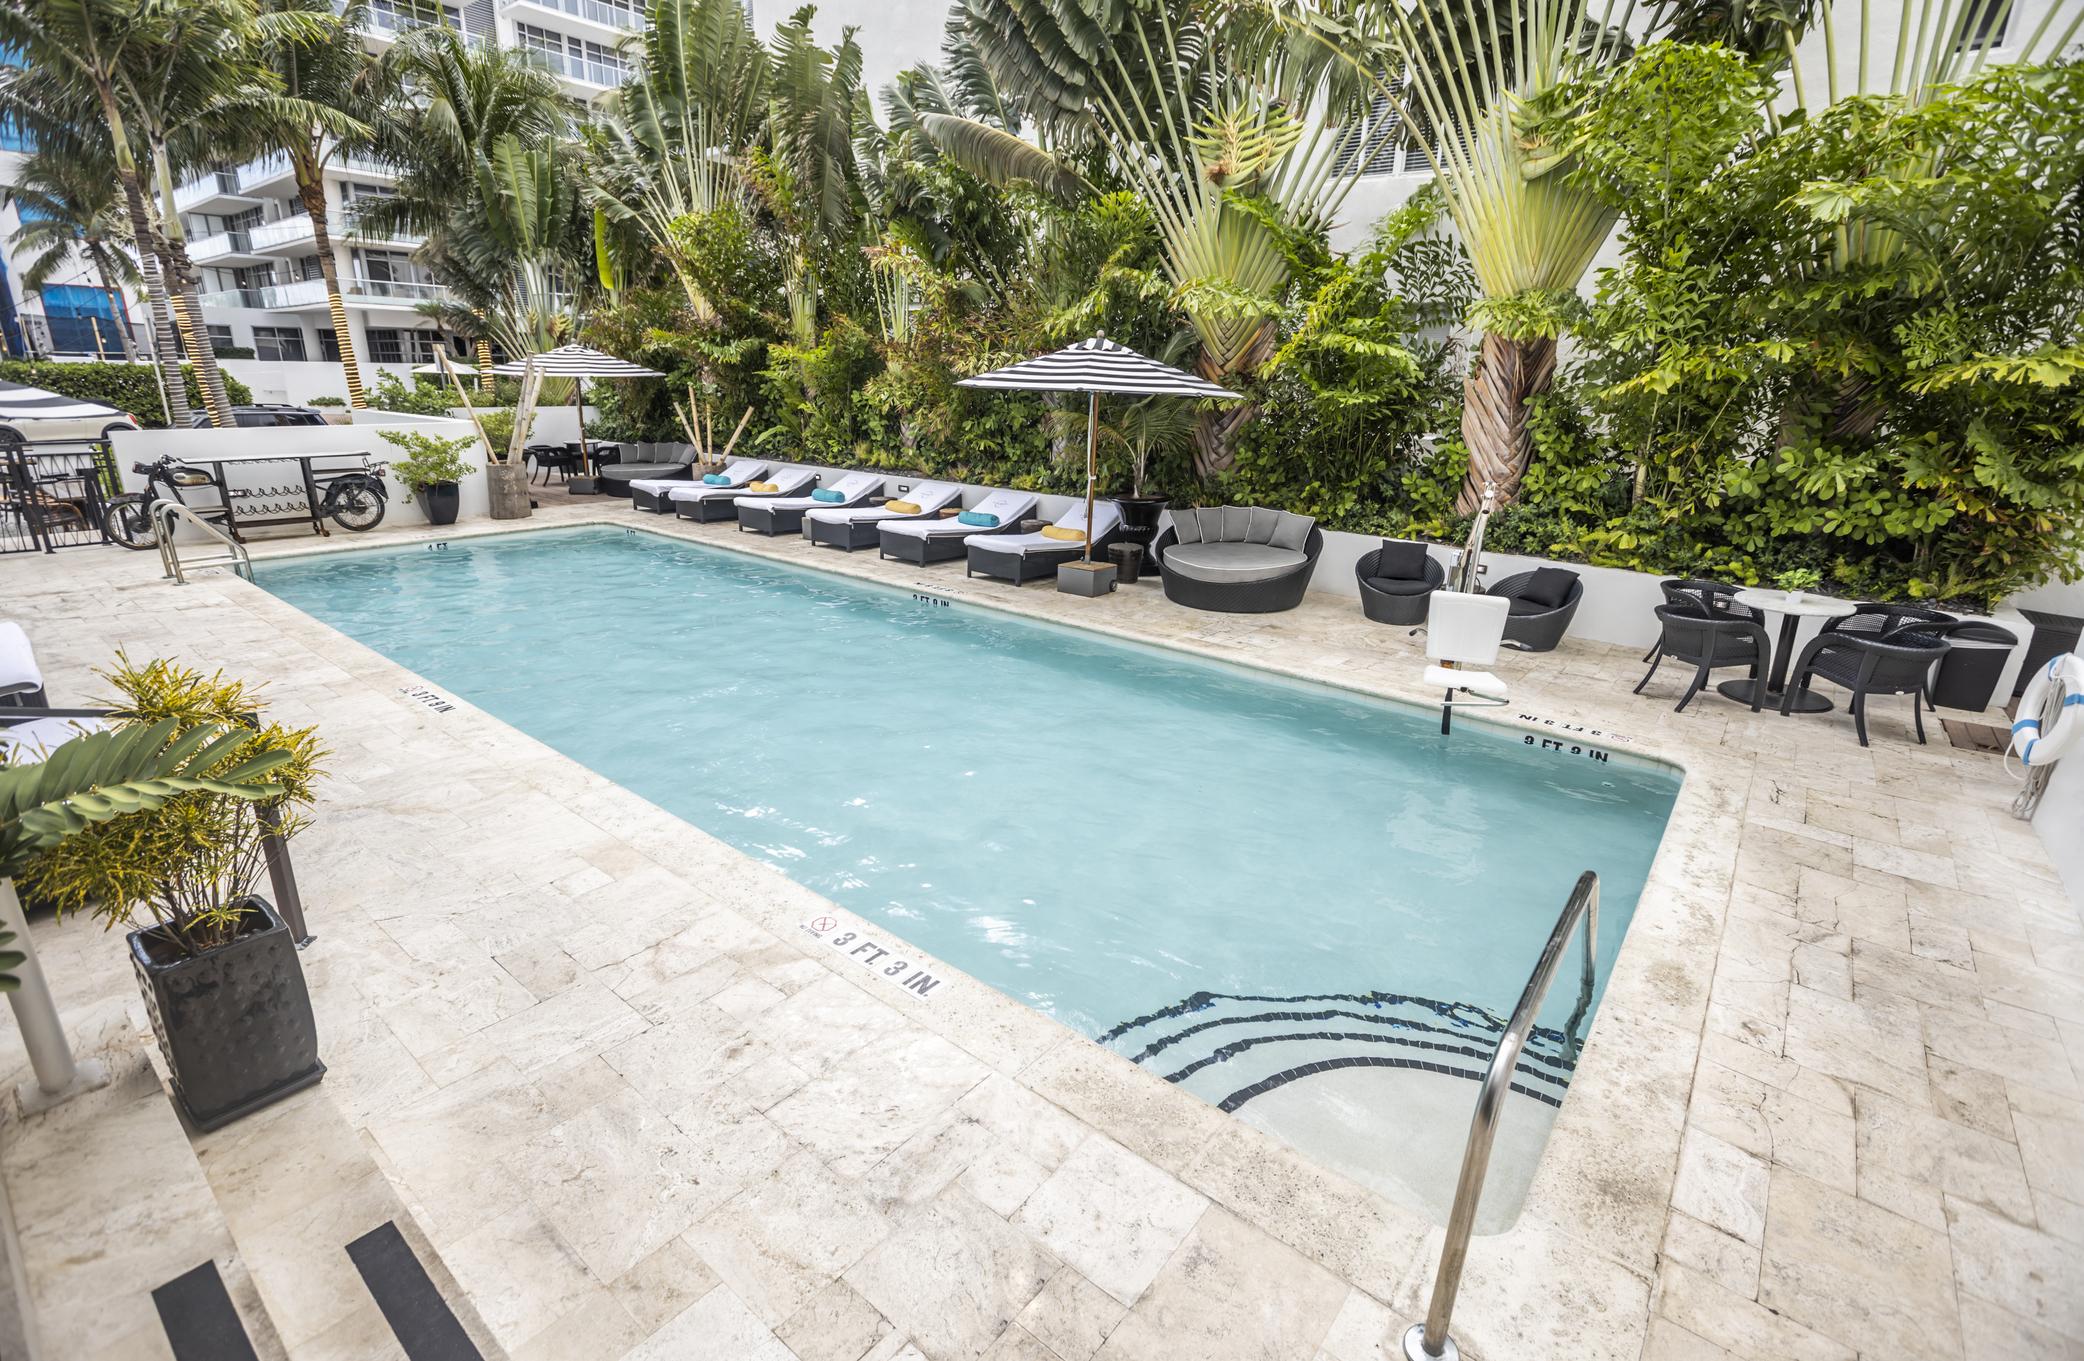 HOTEL CROYDON MIAMI BEACH, FL 4* (United States) - from US$ 90 | BOOKED